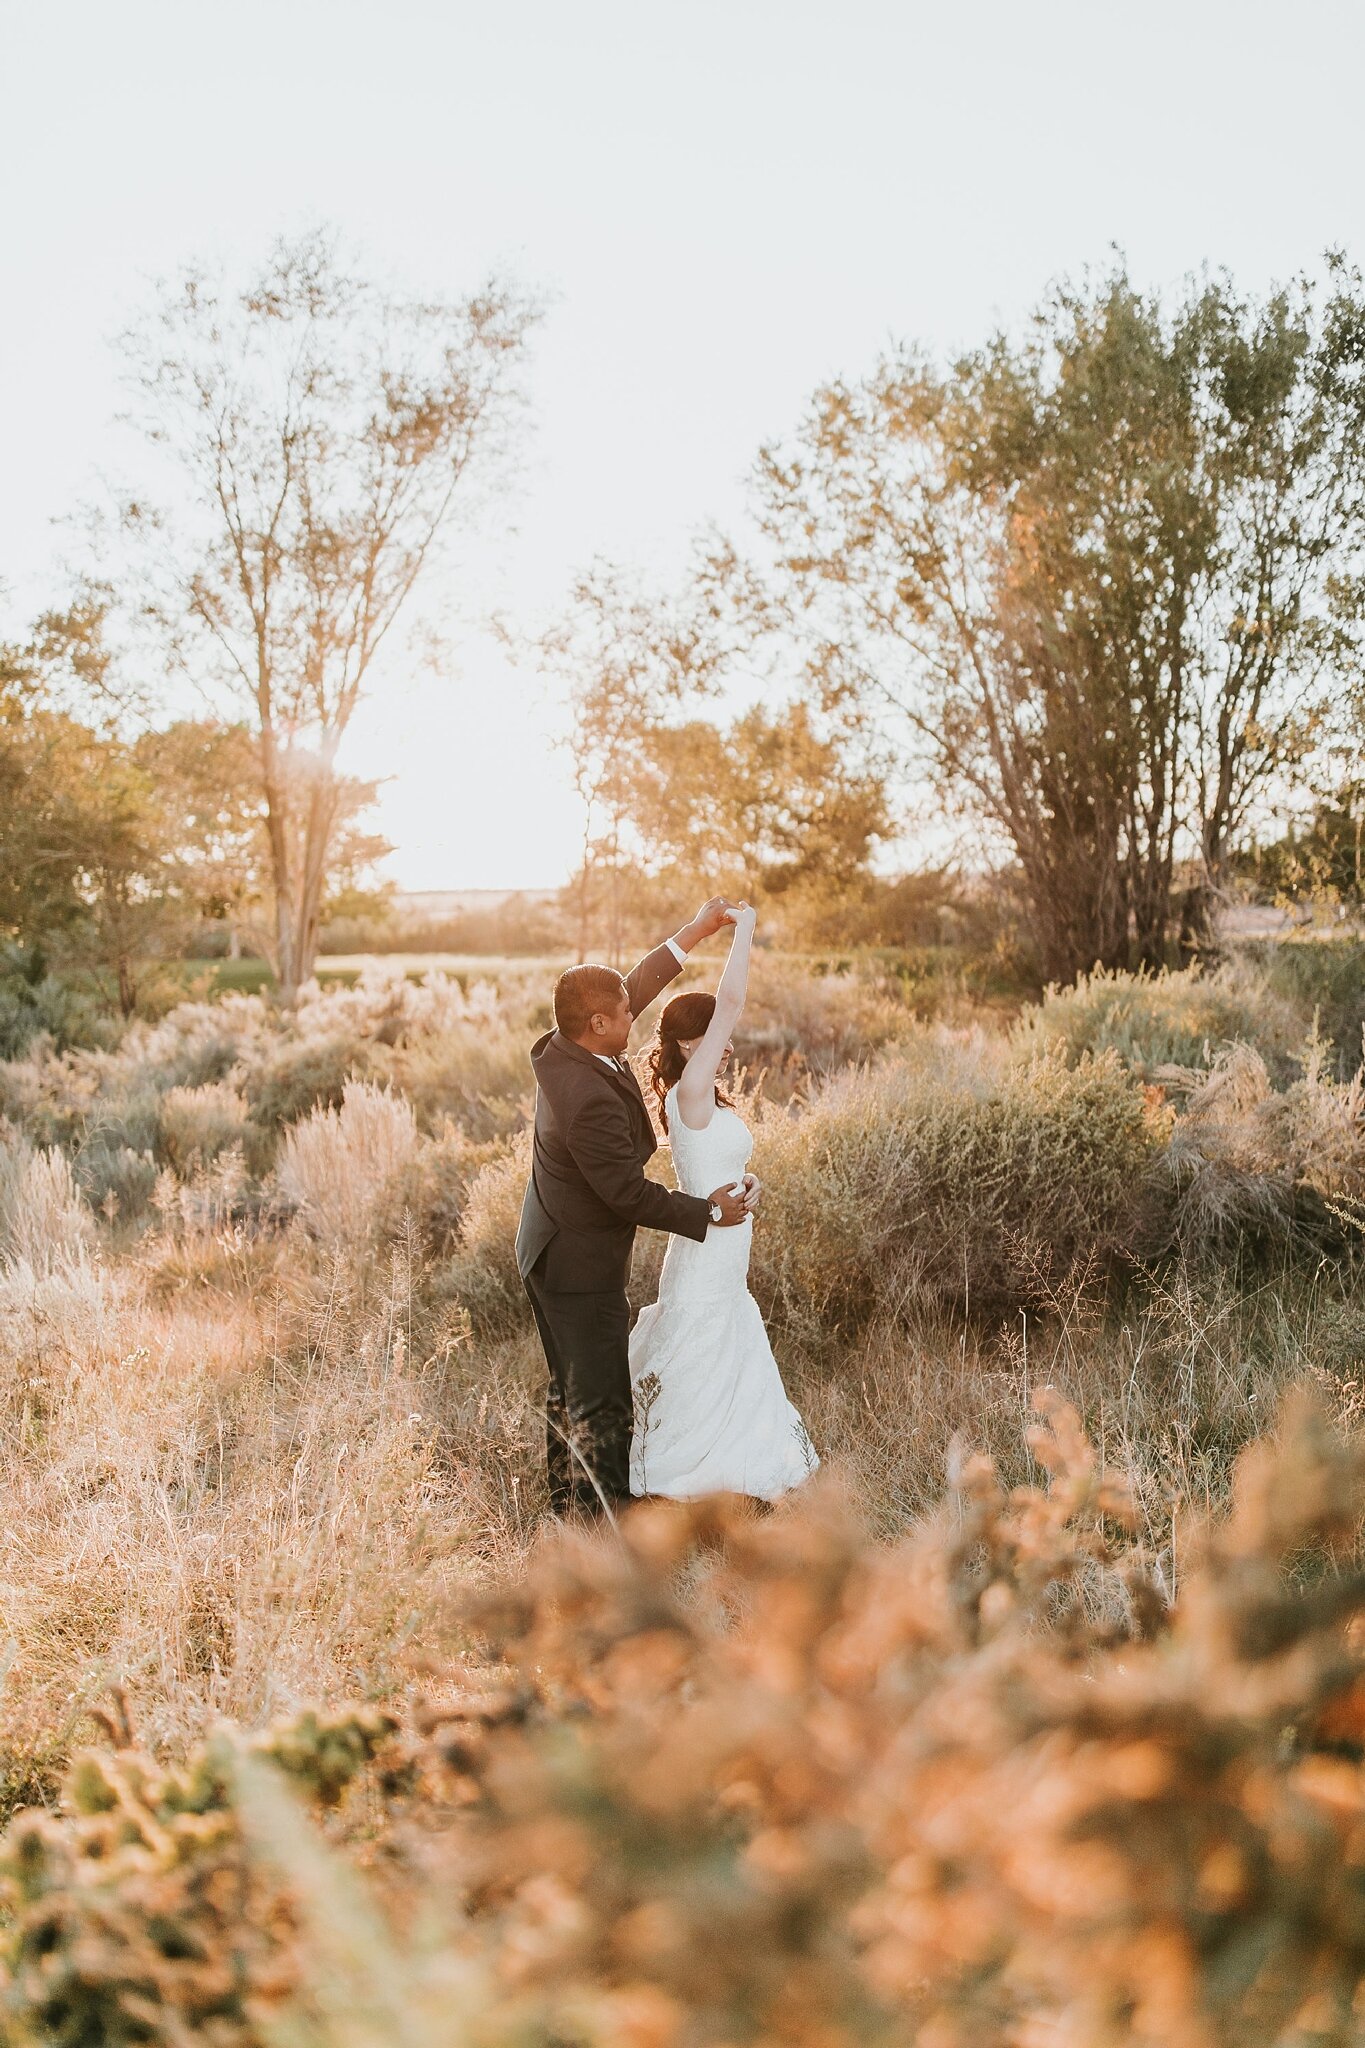 Alicia+lucia+photography+-+albuquerque+wedding+photographer+-+santa+fe+wedding+photography+-+new+mexico+wedding+photographer+-+new+mexico+wedding+-+wedding+gowns+-+trumpet+wedding+gown+-+bridal+gowns_0055.jpg